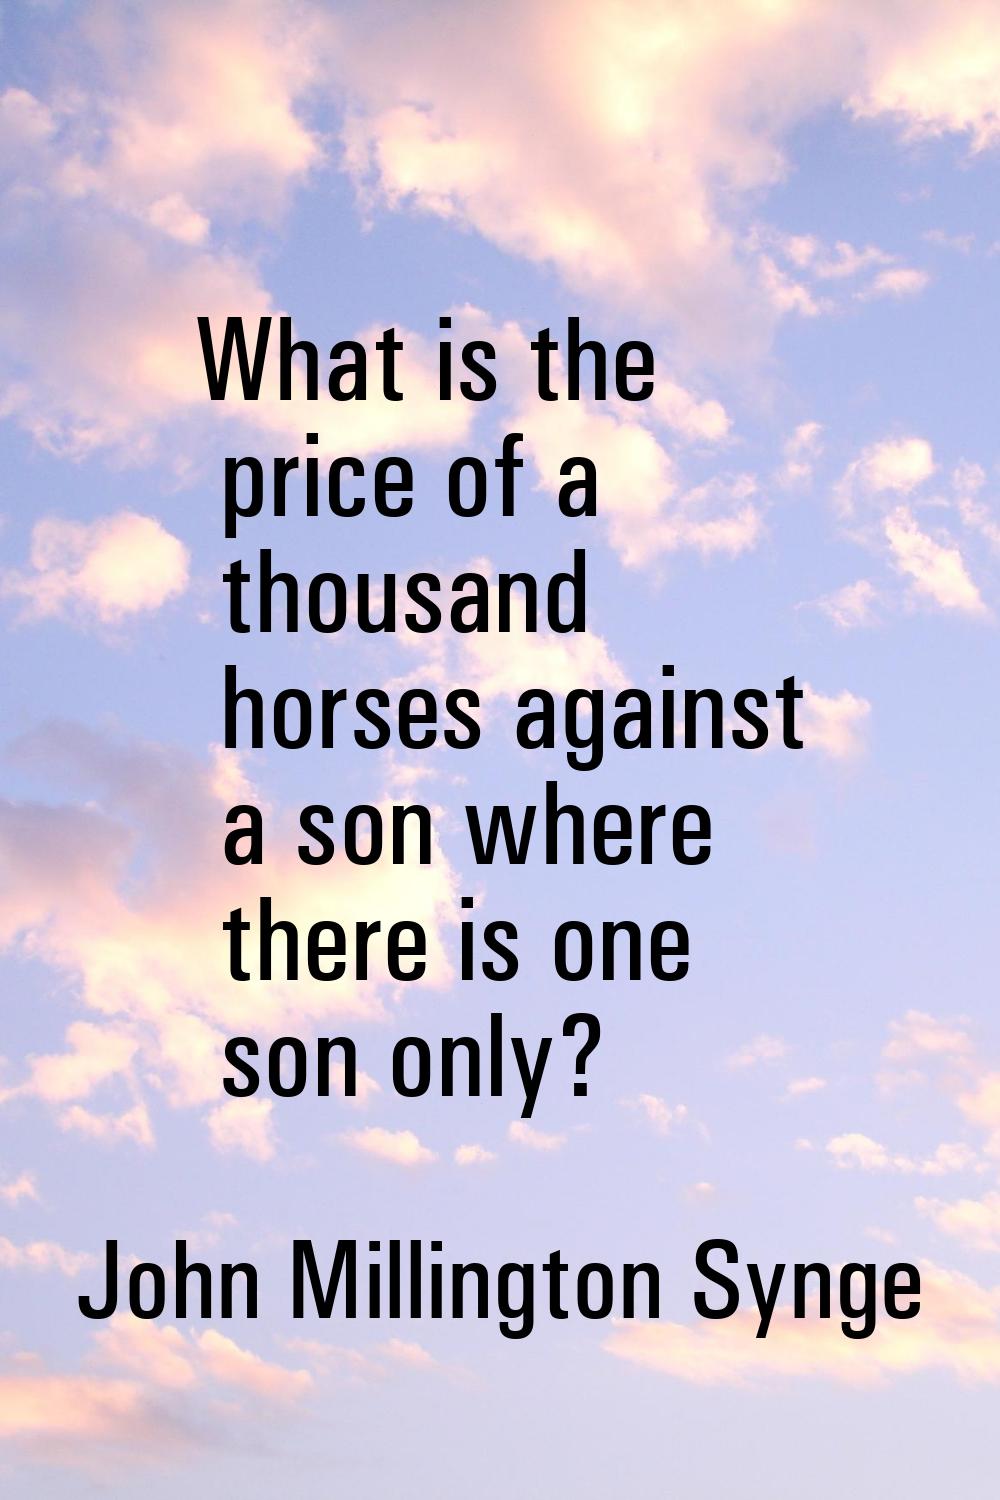 What is the price of a thousand horses against a son where there is one son only?